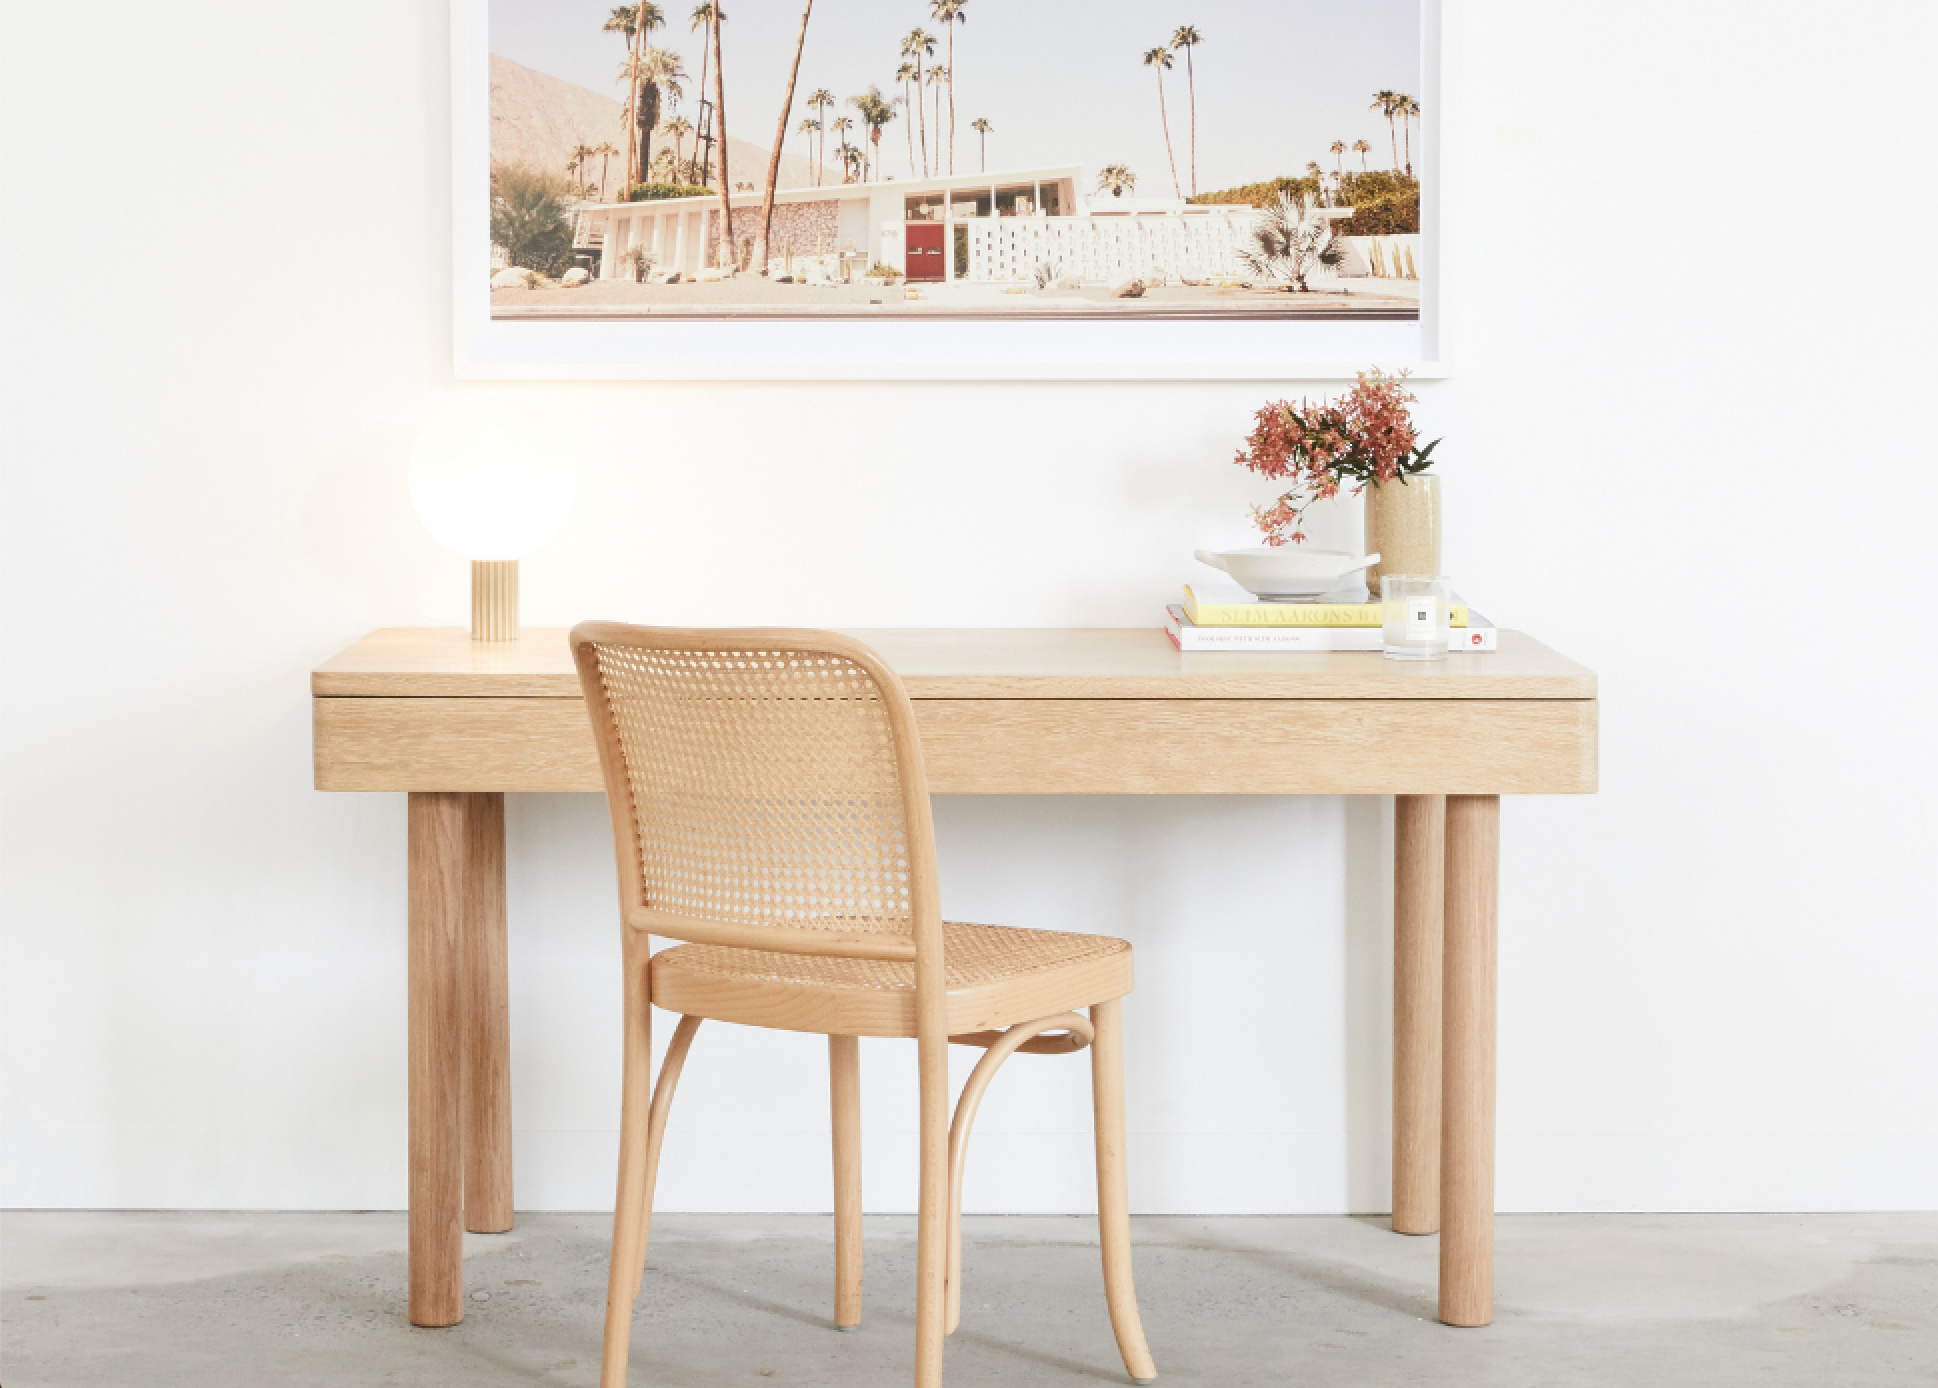 DISCOVER THE DESIGNS OF OUR NEW WATTS & ISABEL DESKS